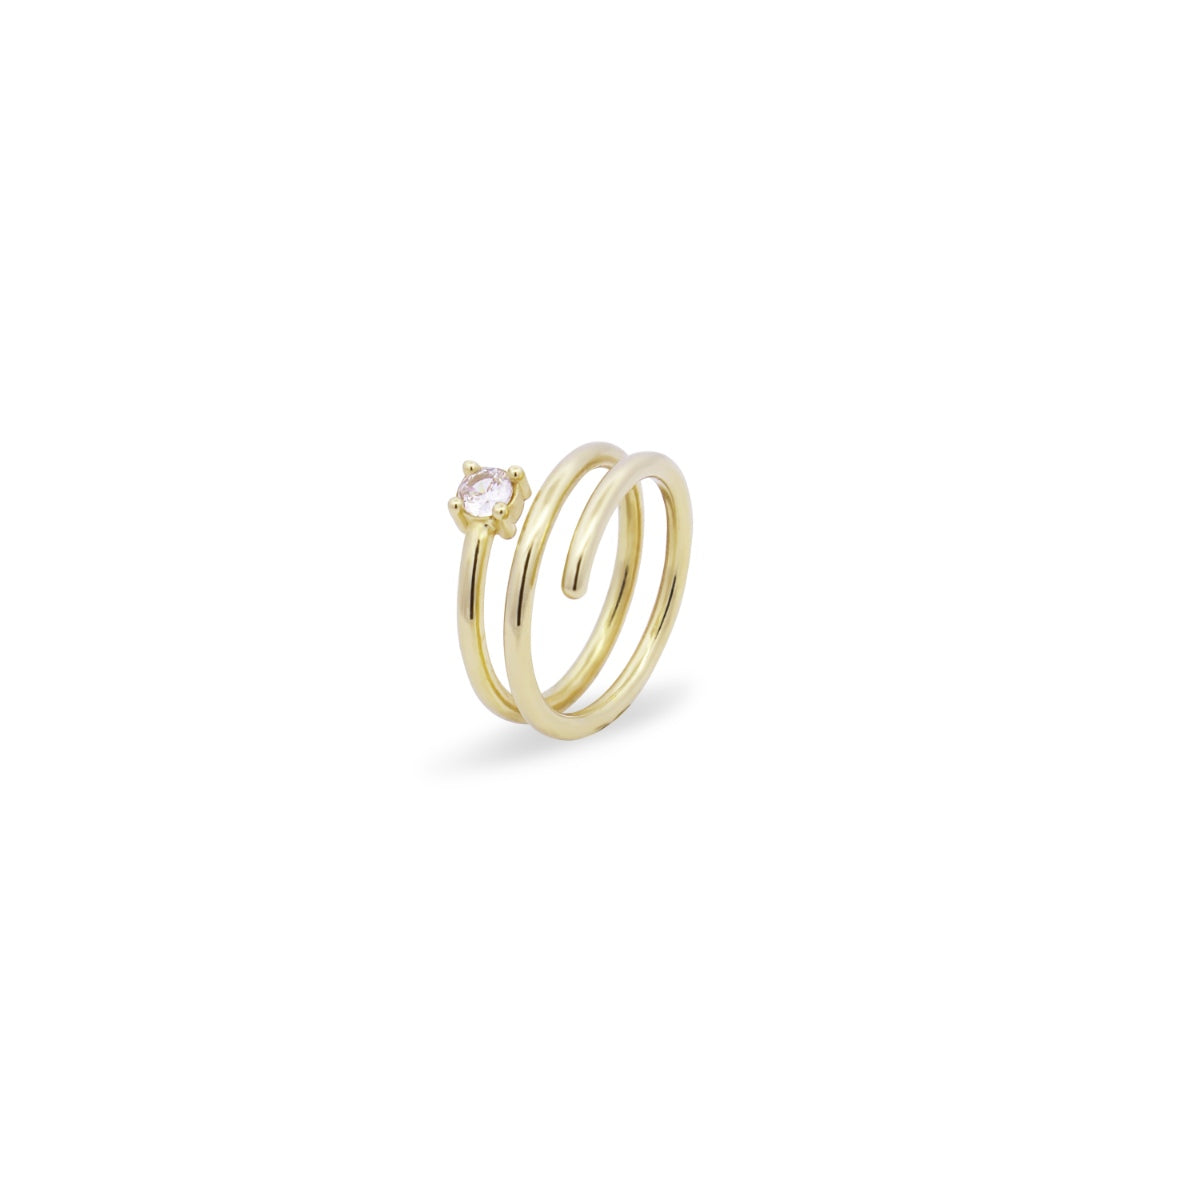 Rings - Spiral and bezel ring with zircon - SHAPES - 1 | Rue des Mille